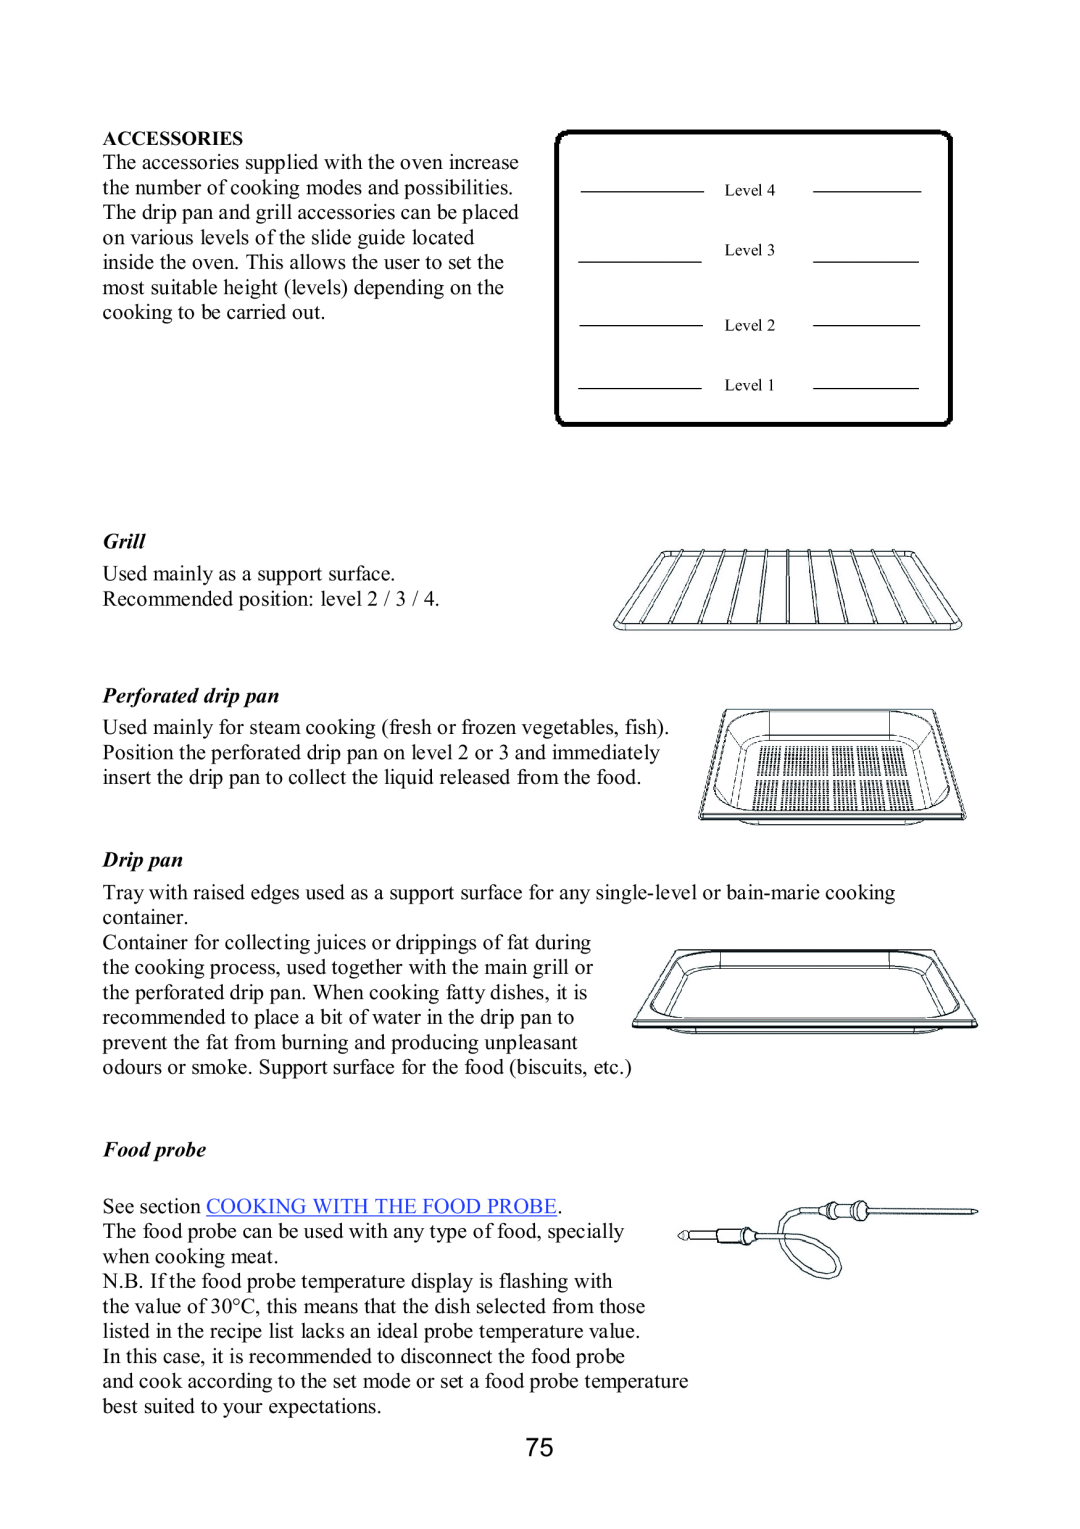 Foster S4000 user manual Grill, Perforated drip pan, Drip pan, Food probe, See section COOKING WITH THE FOOD PROBE 